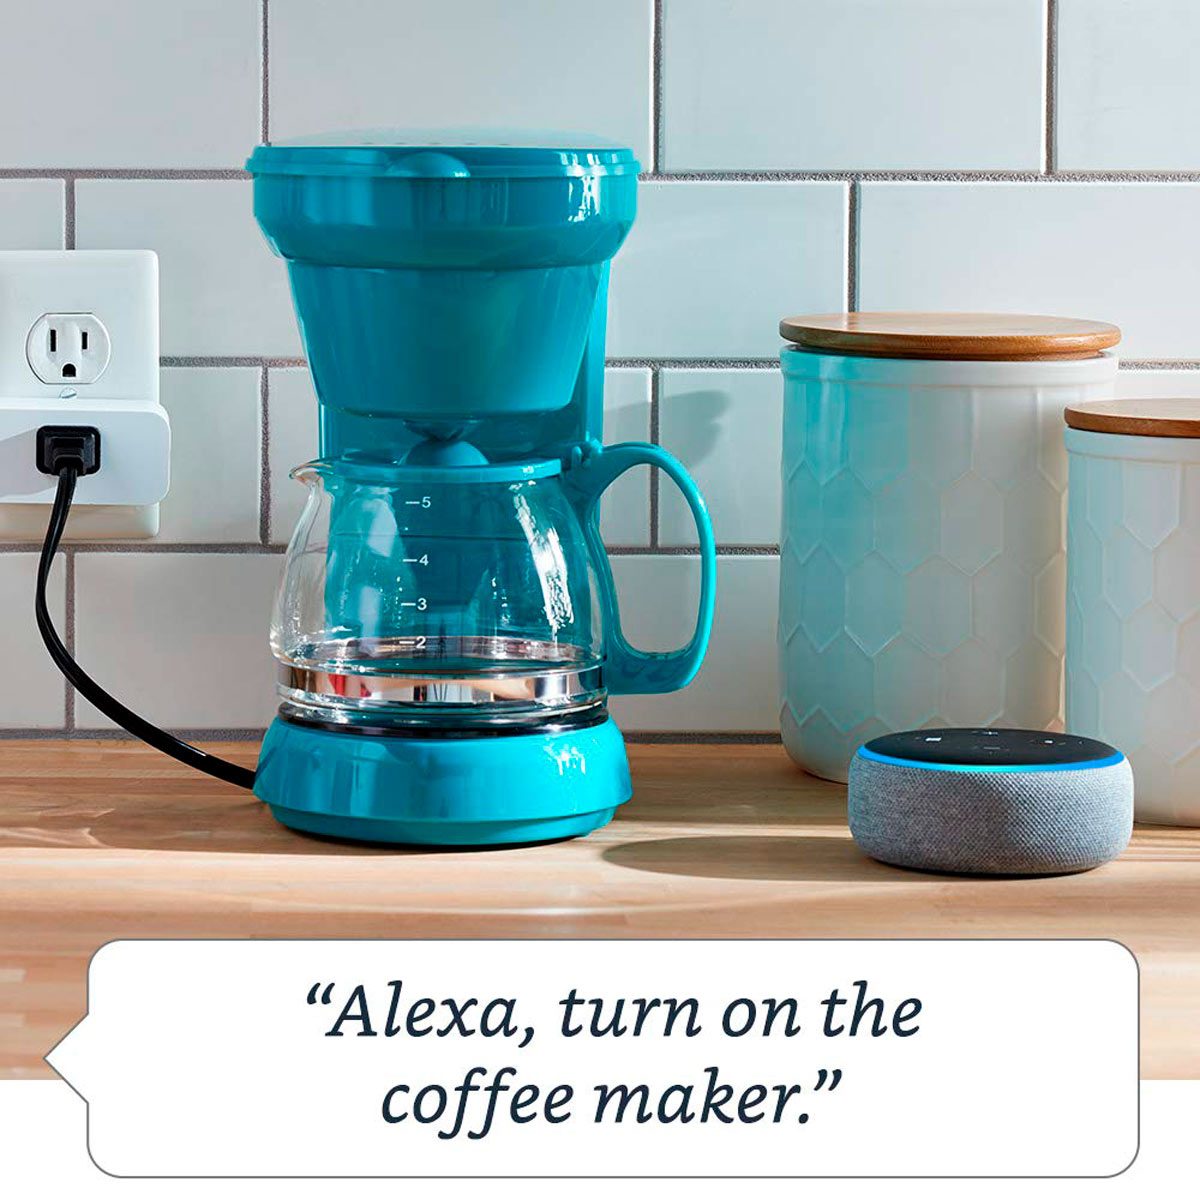 does the alexa have to be plugged in